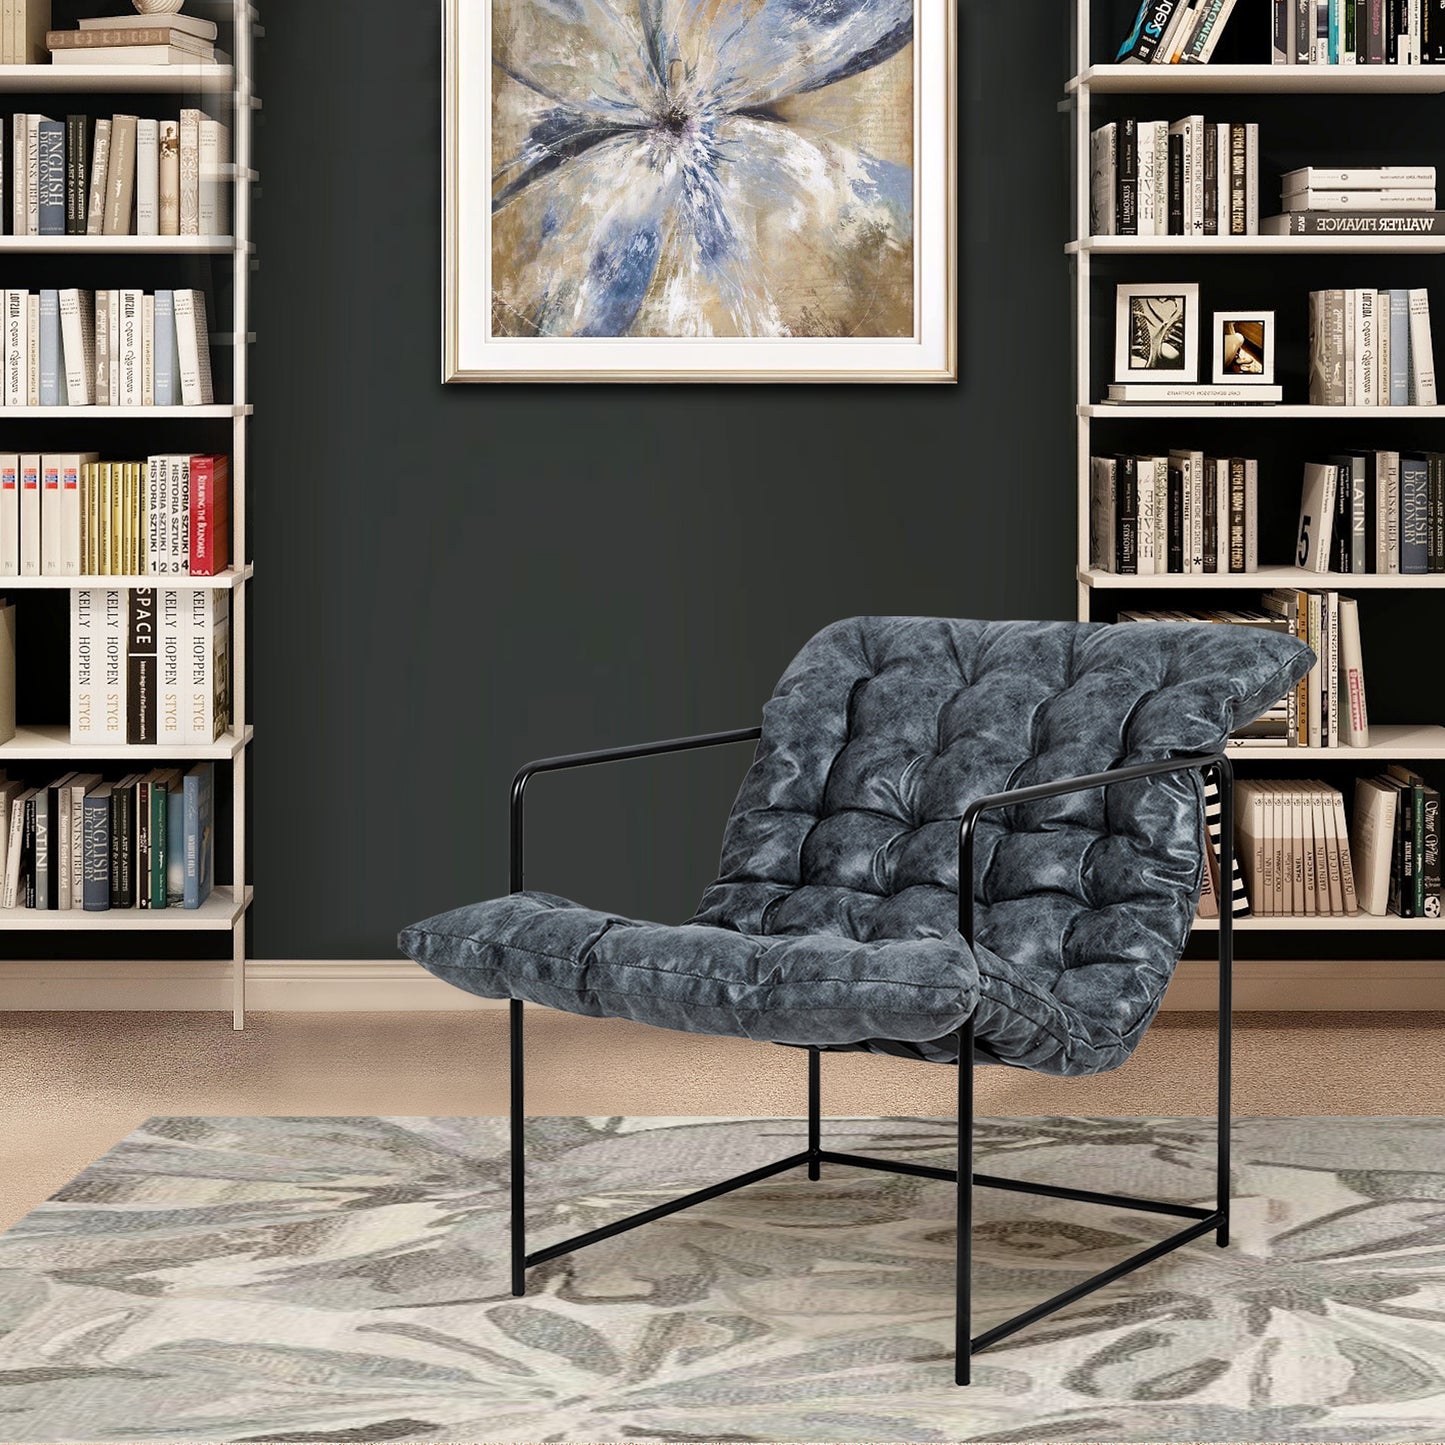 Gray Upholstered Armchair,Set of 1